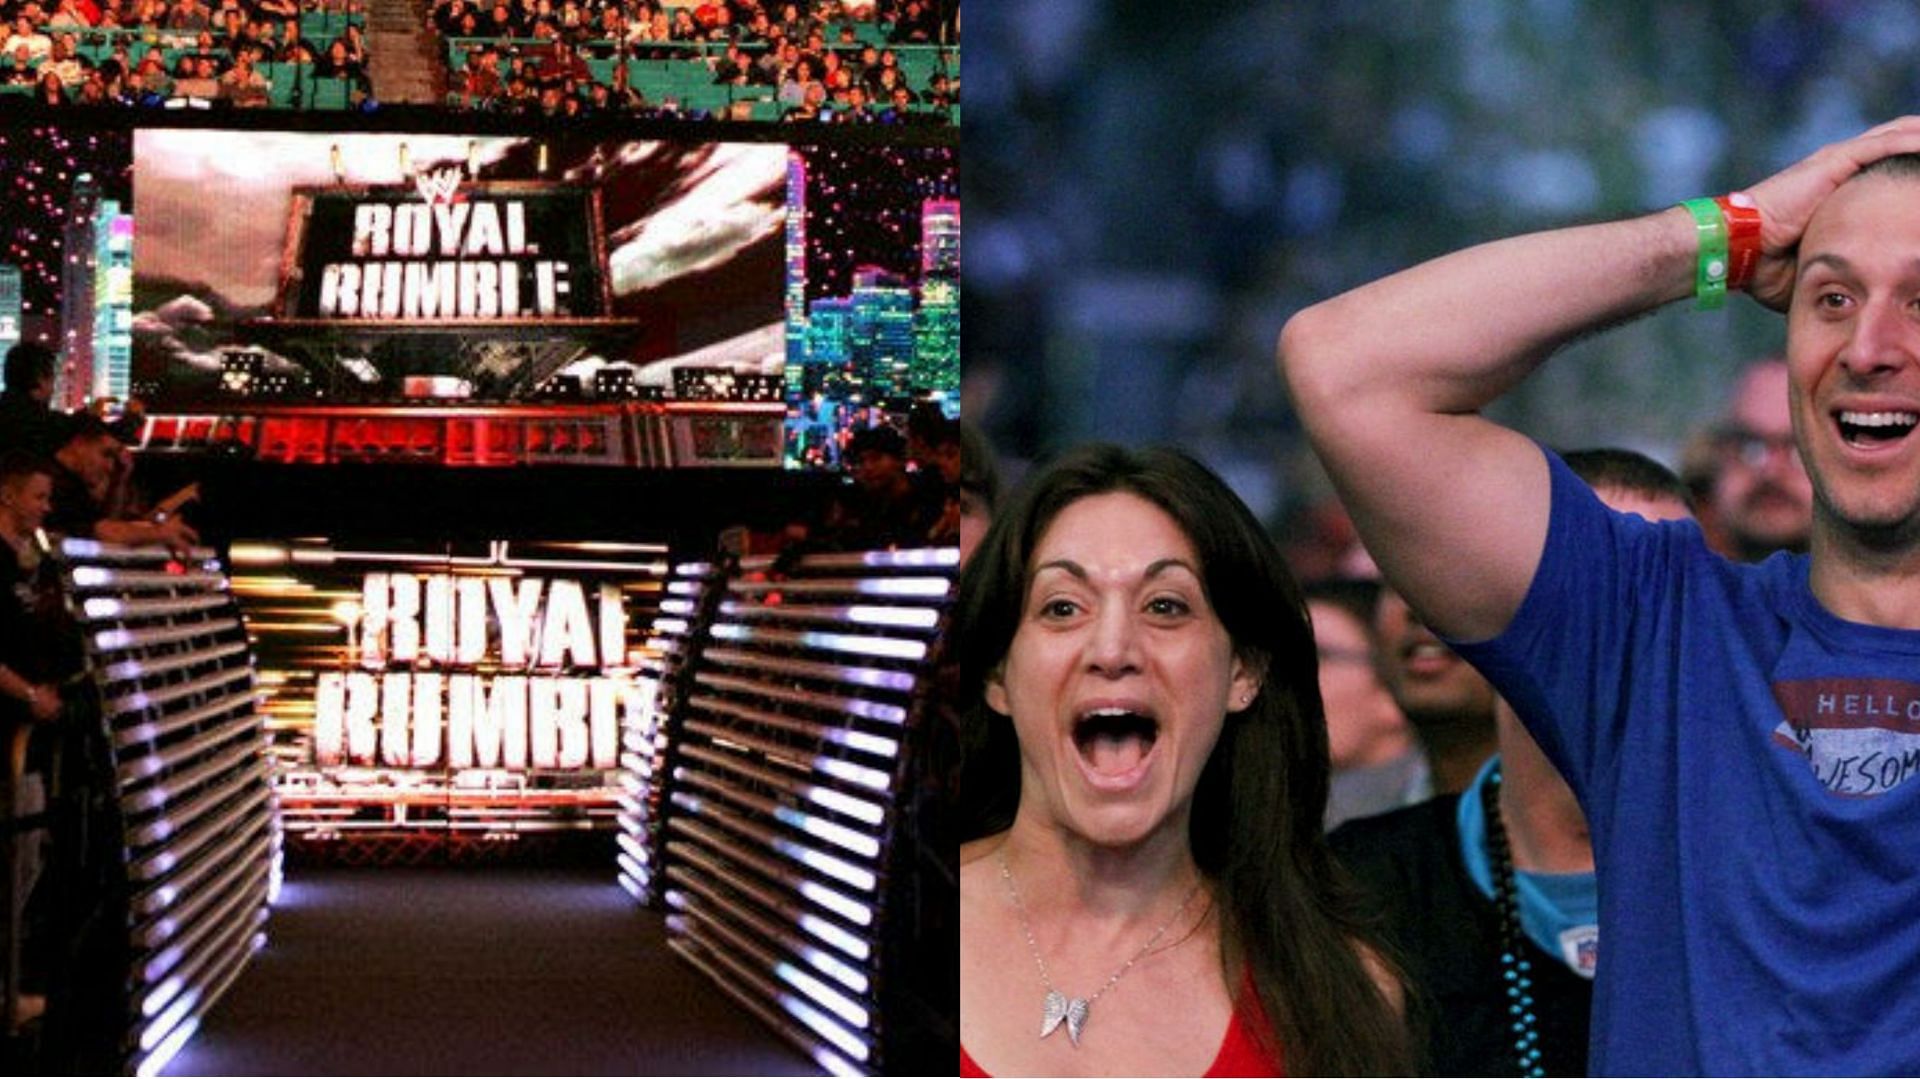 Royal Rumble will take place this week on Saturday!